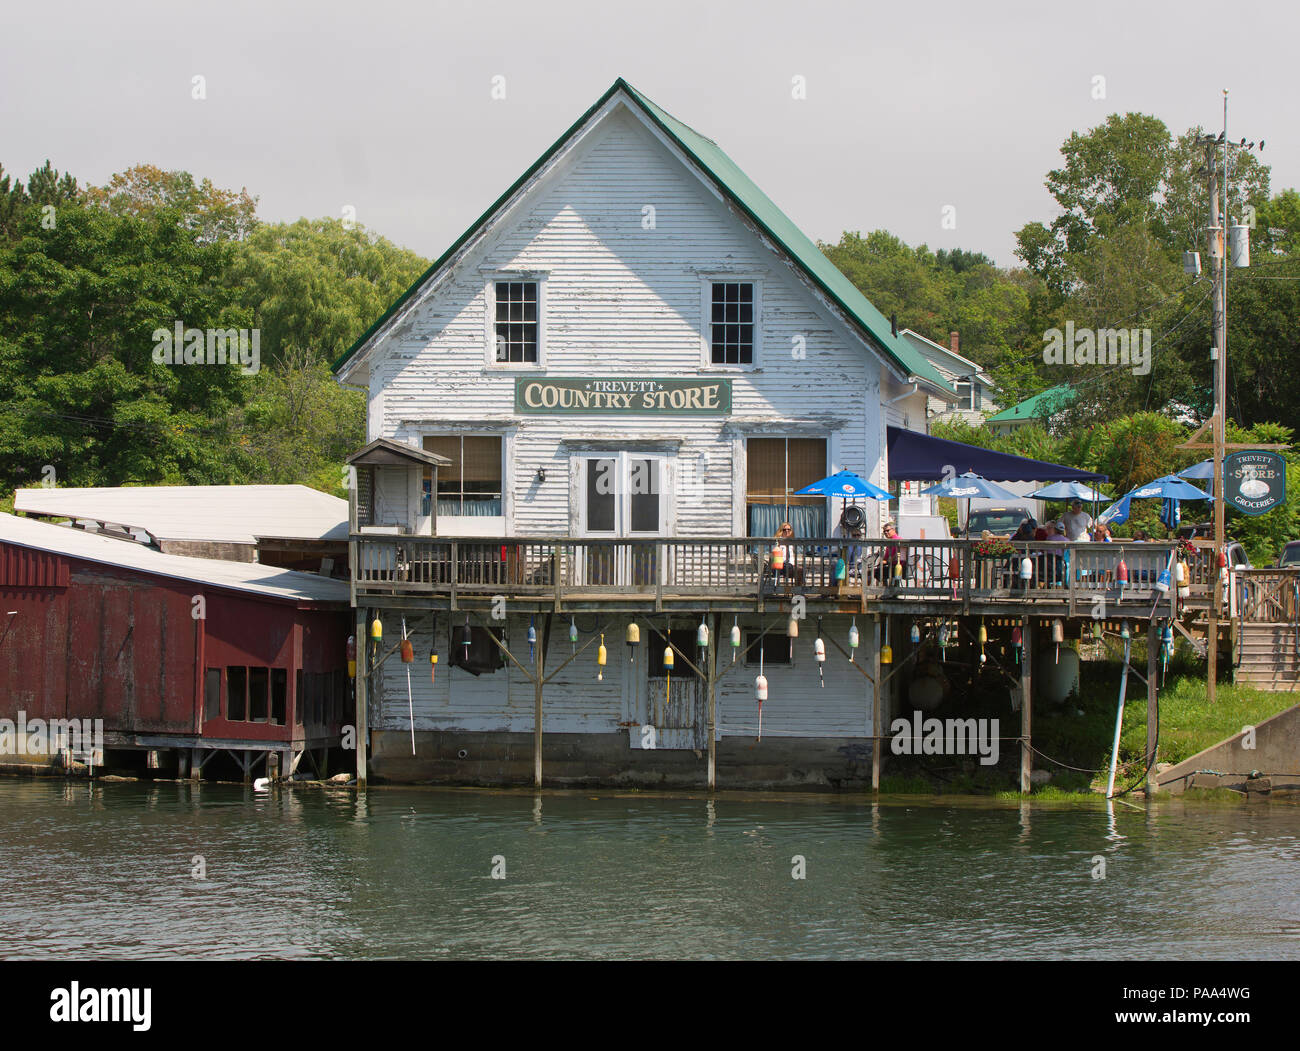 Patrons enjoying lunch at the Trevett Country Store along the water's edge in (Trevett) Boothbay, Maine, USA Stock Photo